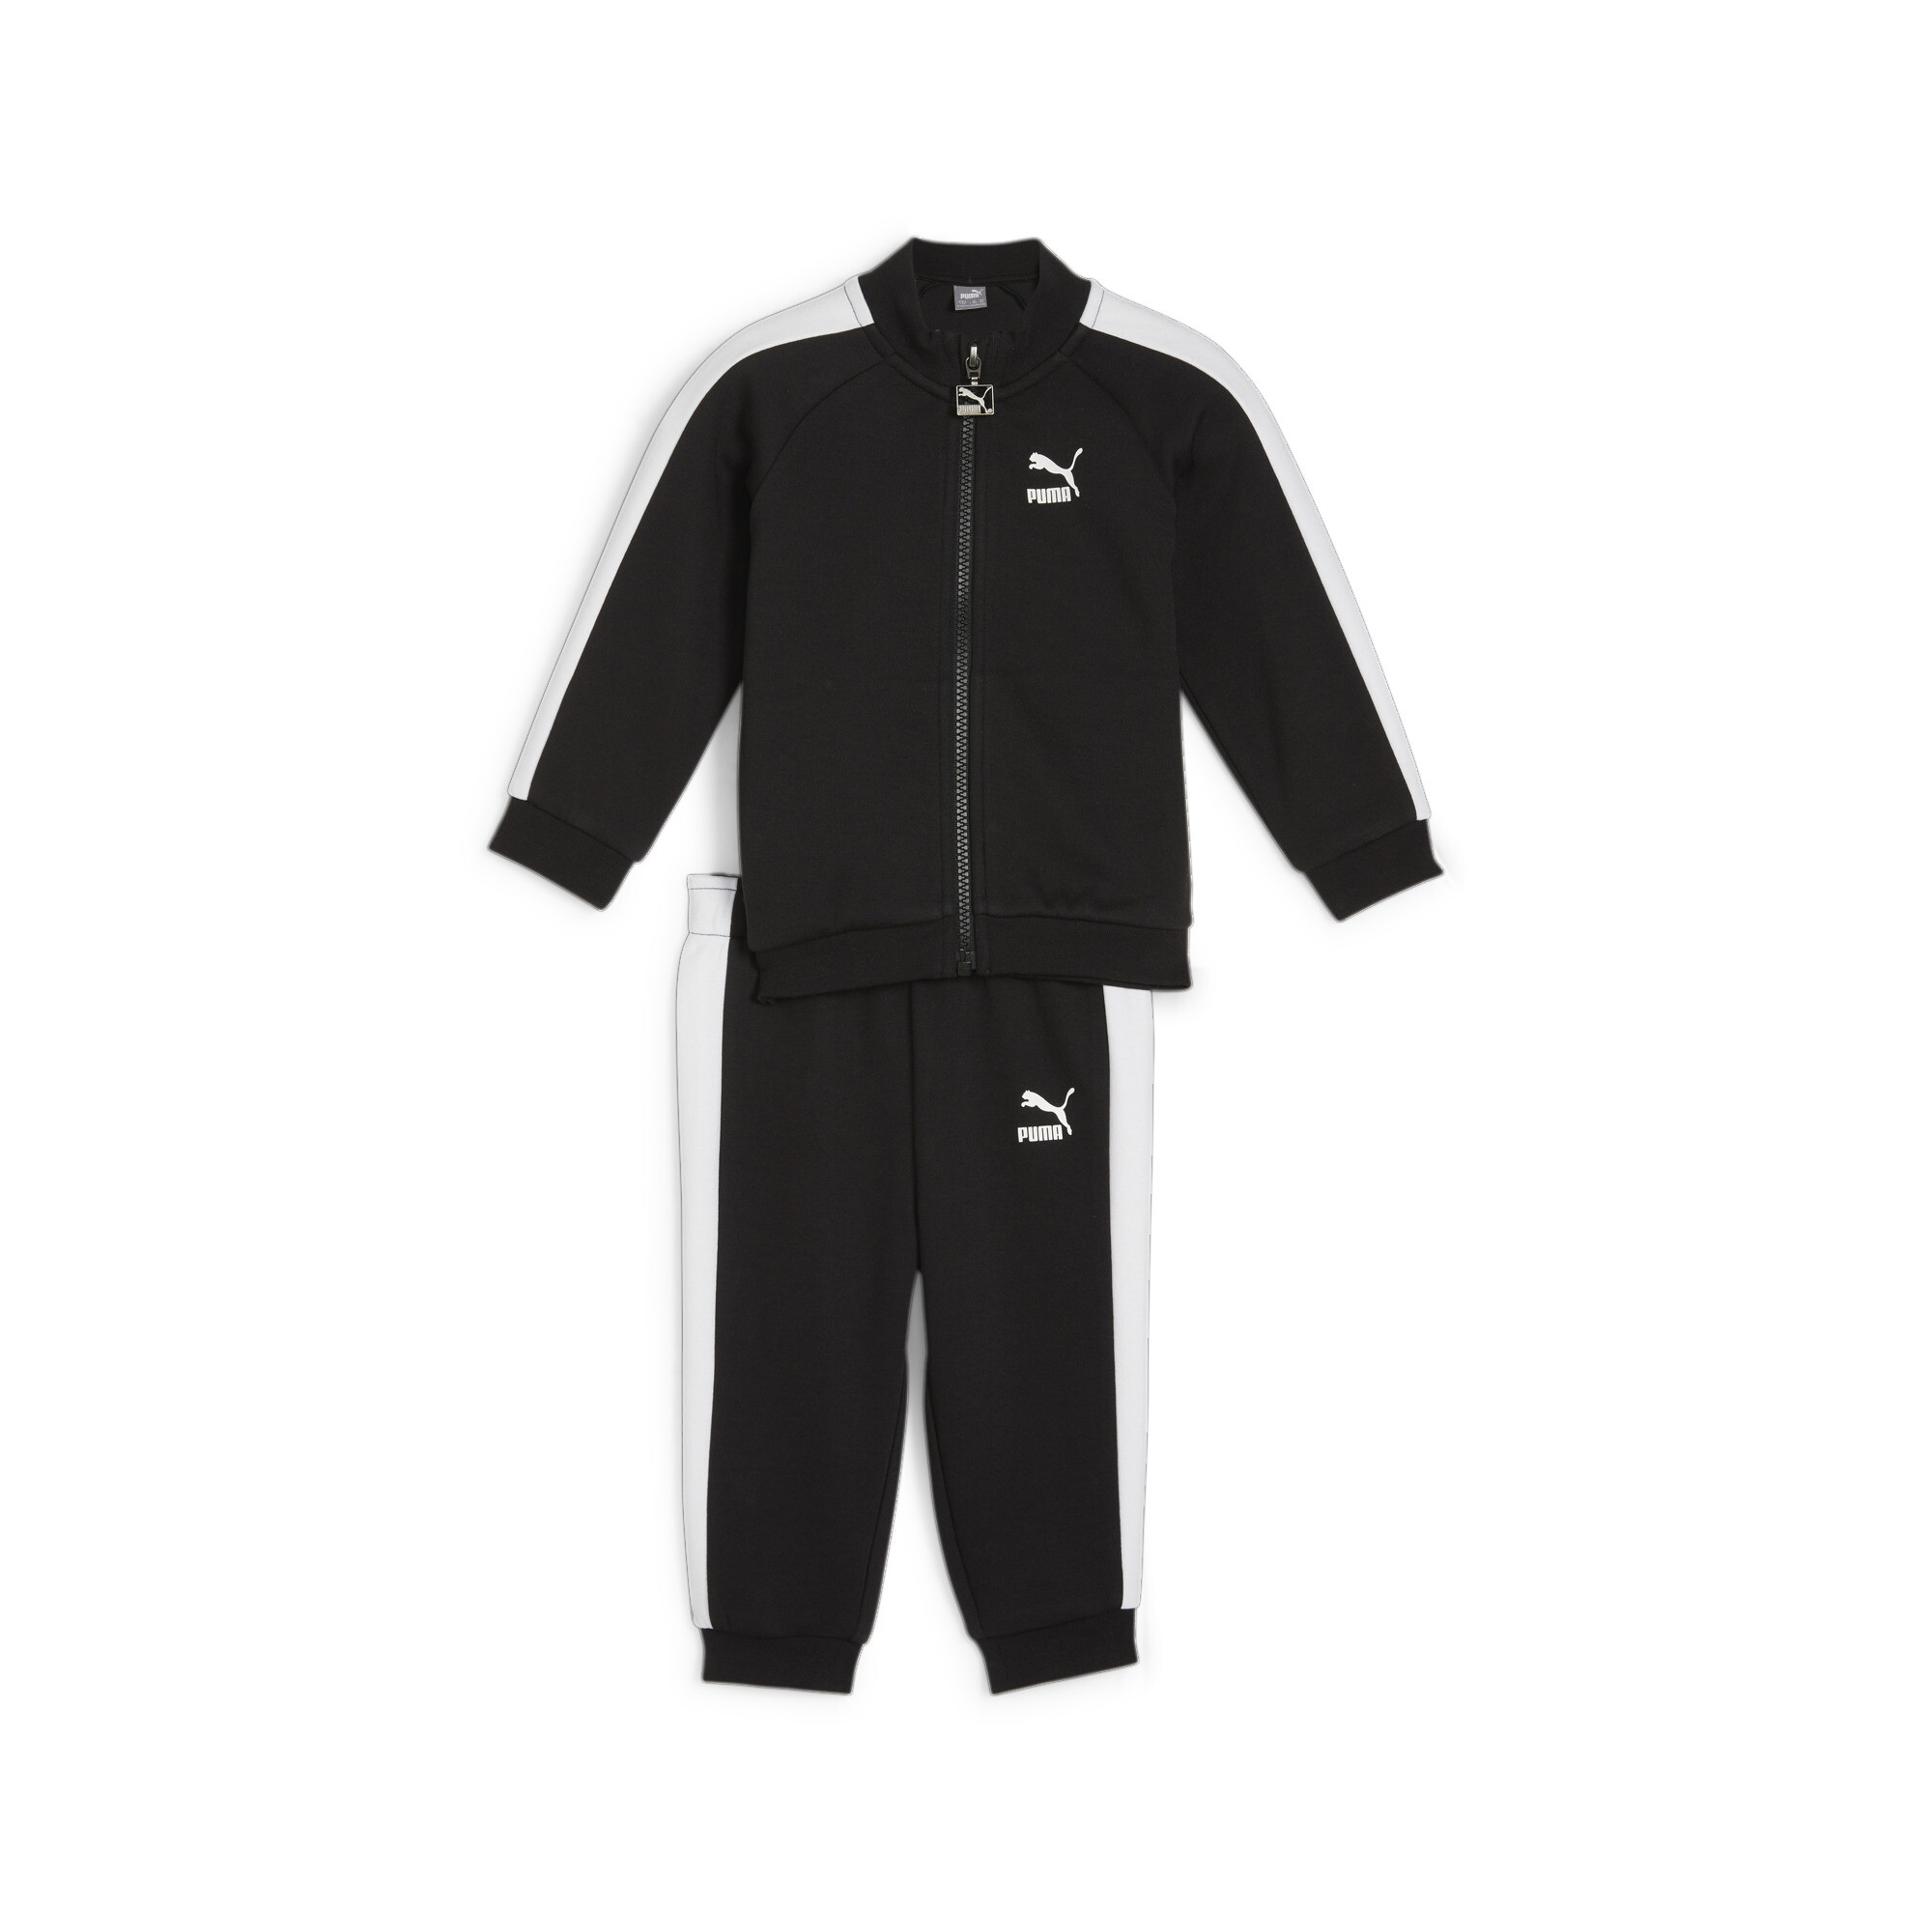 PUMA MINICATS T7 ICONIC Baby Tracksuit Set In Black, Size 1-2 Youth